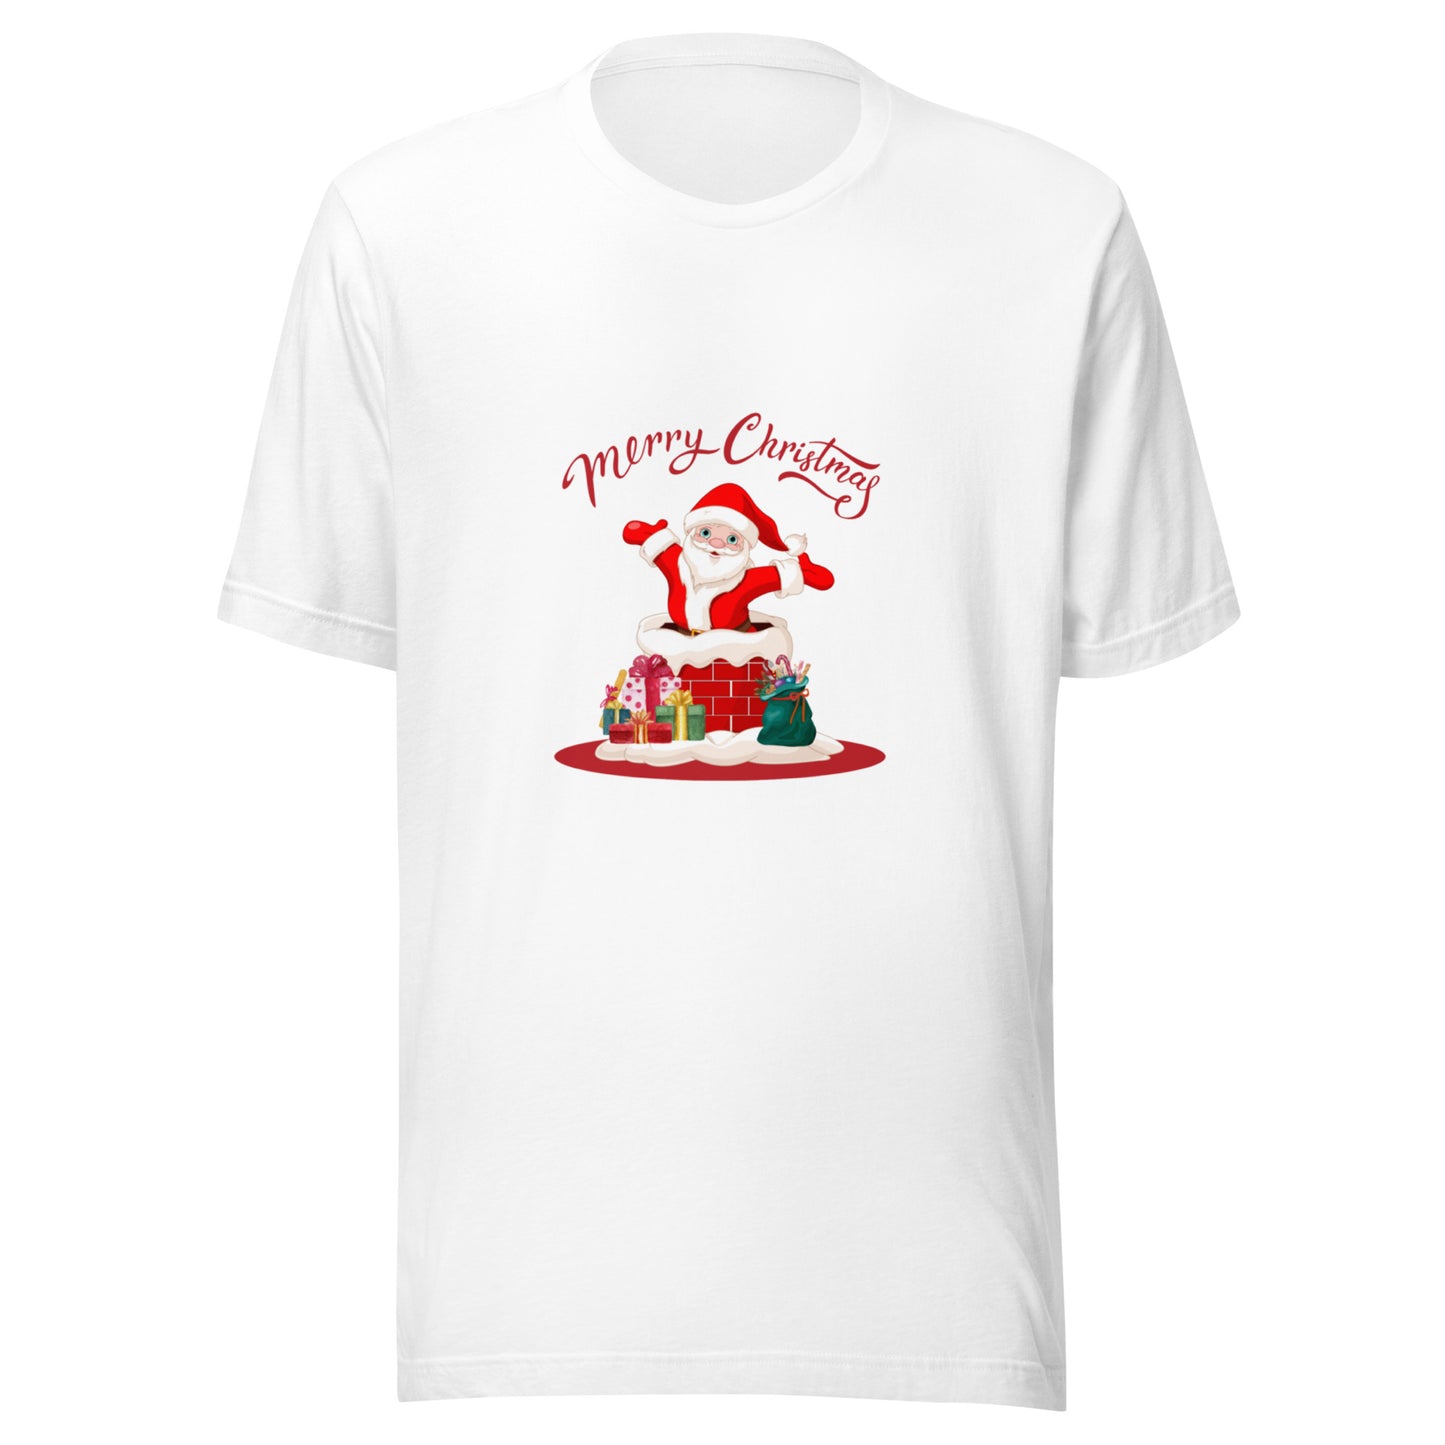 Merry Christmas with Santa Claus Unisex T-Shirt